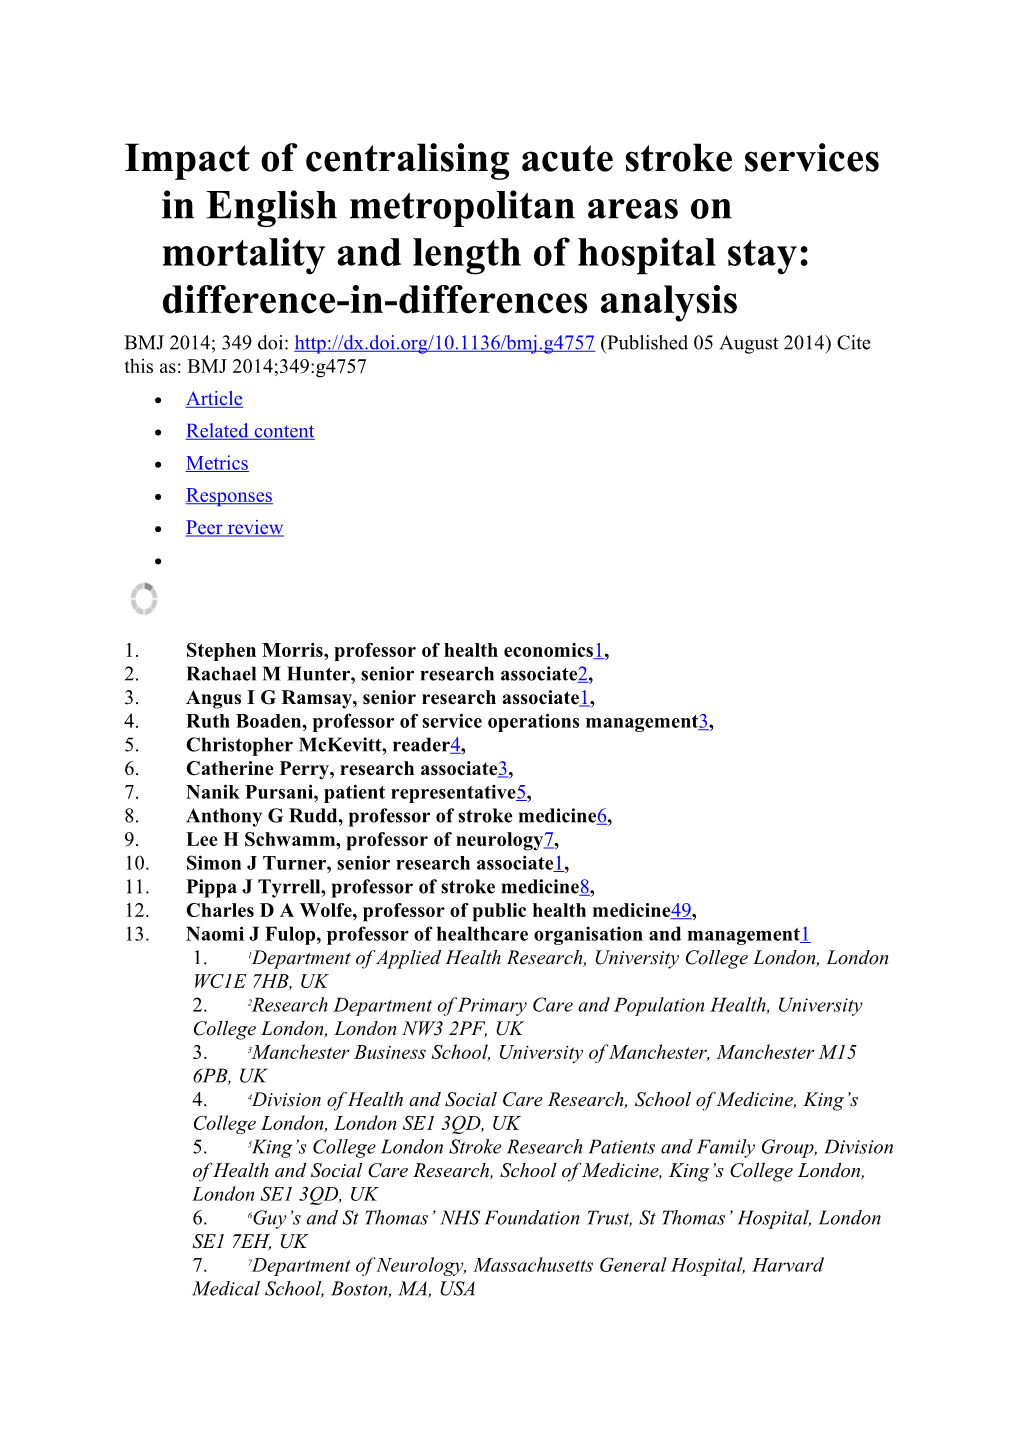 Impact of Centralising Acute Stroke Services in English Metropolitan Areas on Mortality